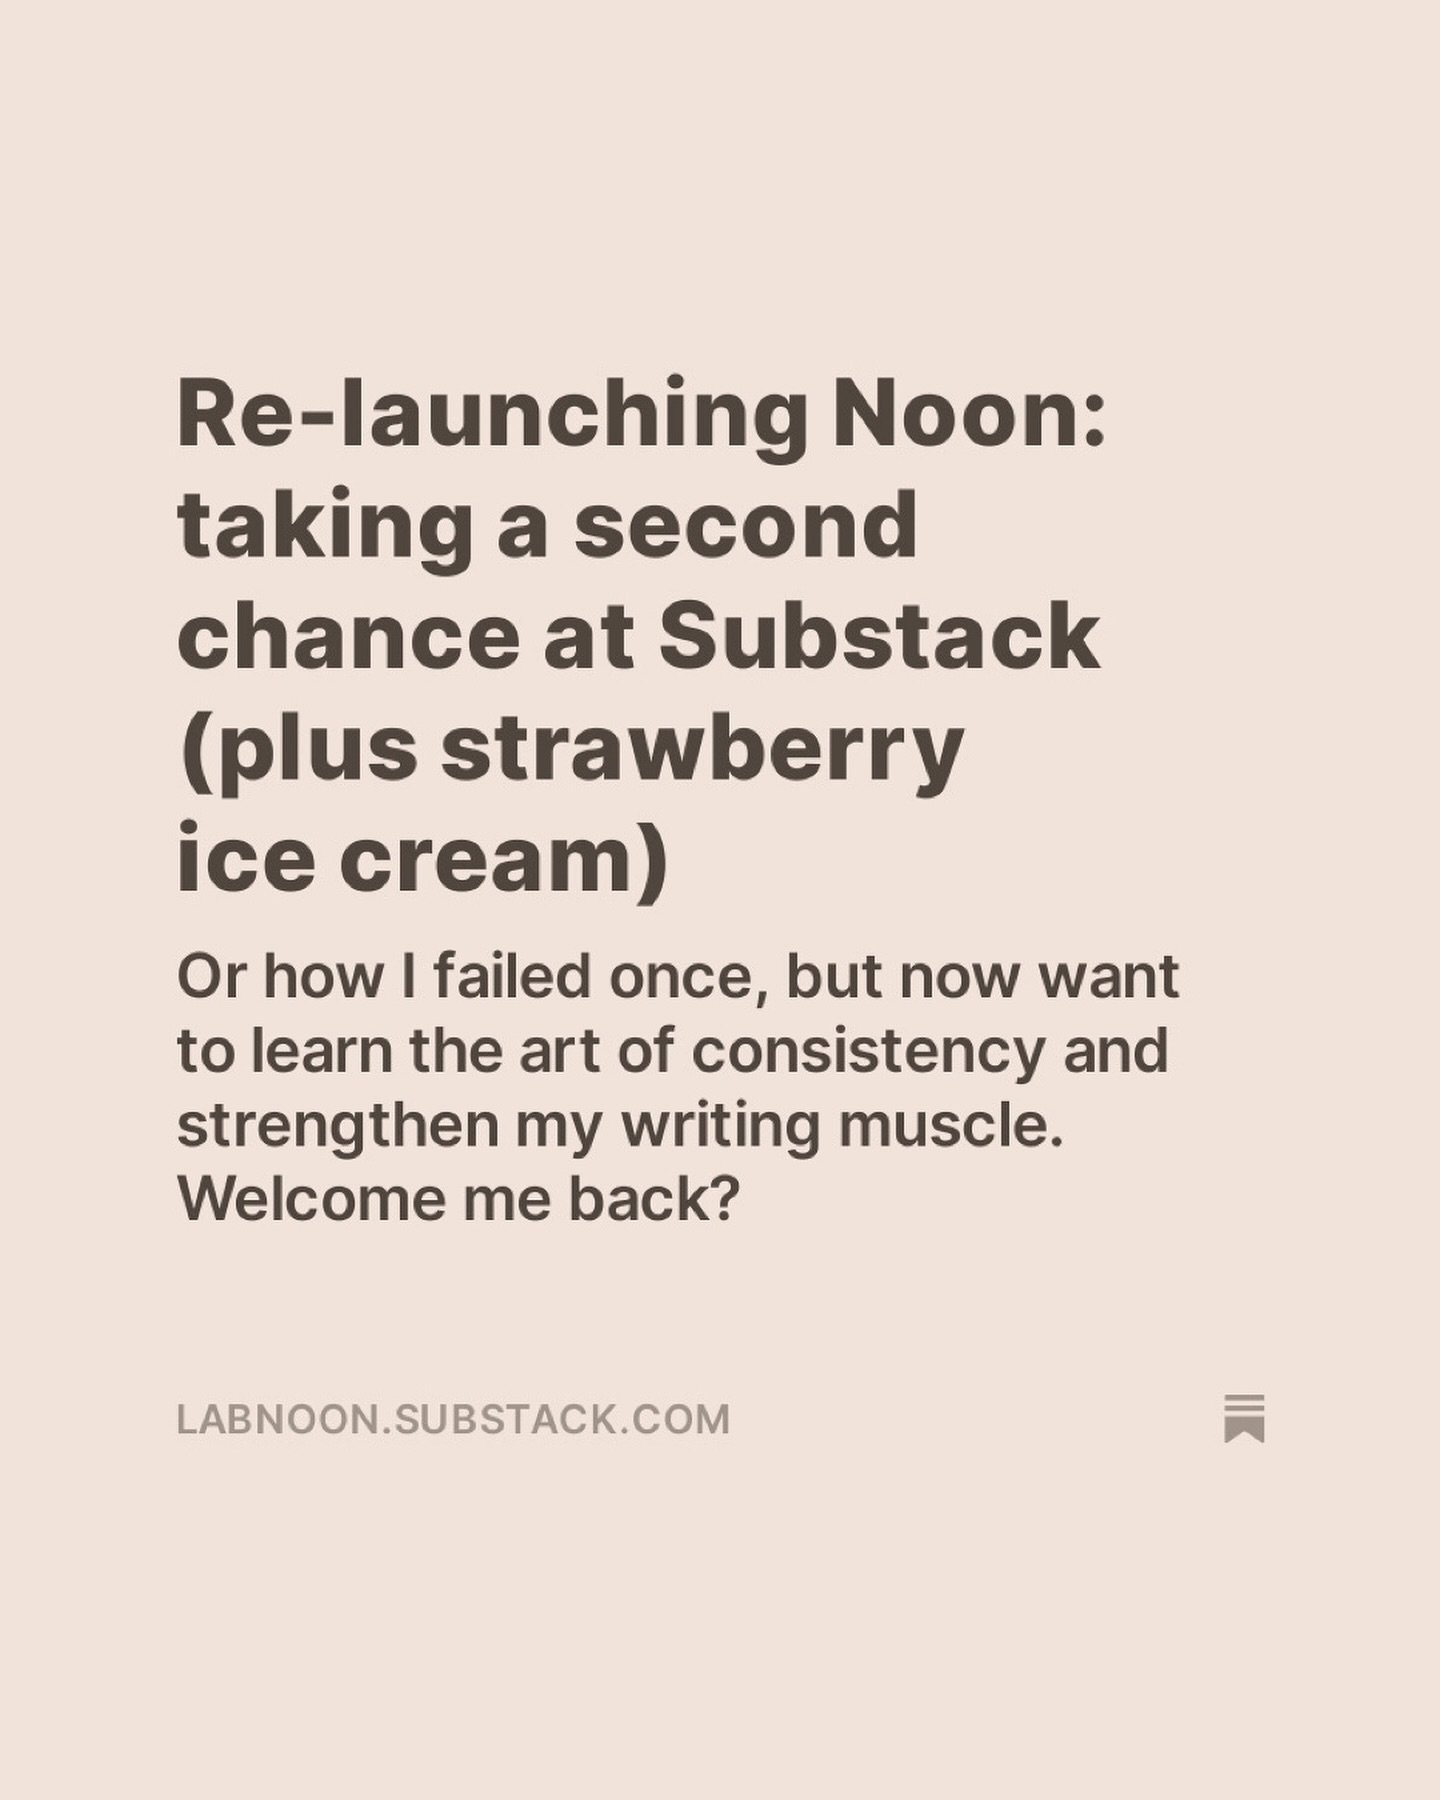 NEWS! I don&rsquo;t know how many people this will reach (ever less, lately a dozen handfuls at most, thanks for the shadowbanning IG), but I&rsquo;m taking a second attempt to get NOON, my @substack publication running again. The first round it was 